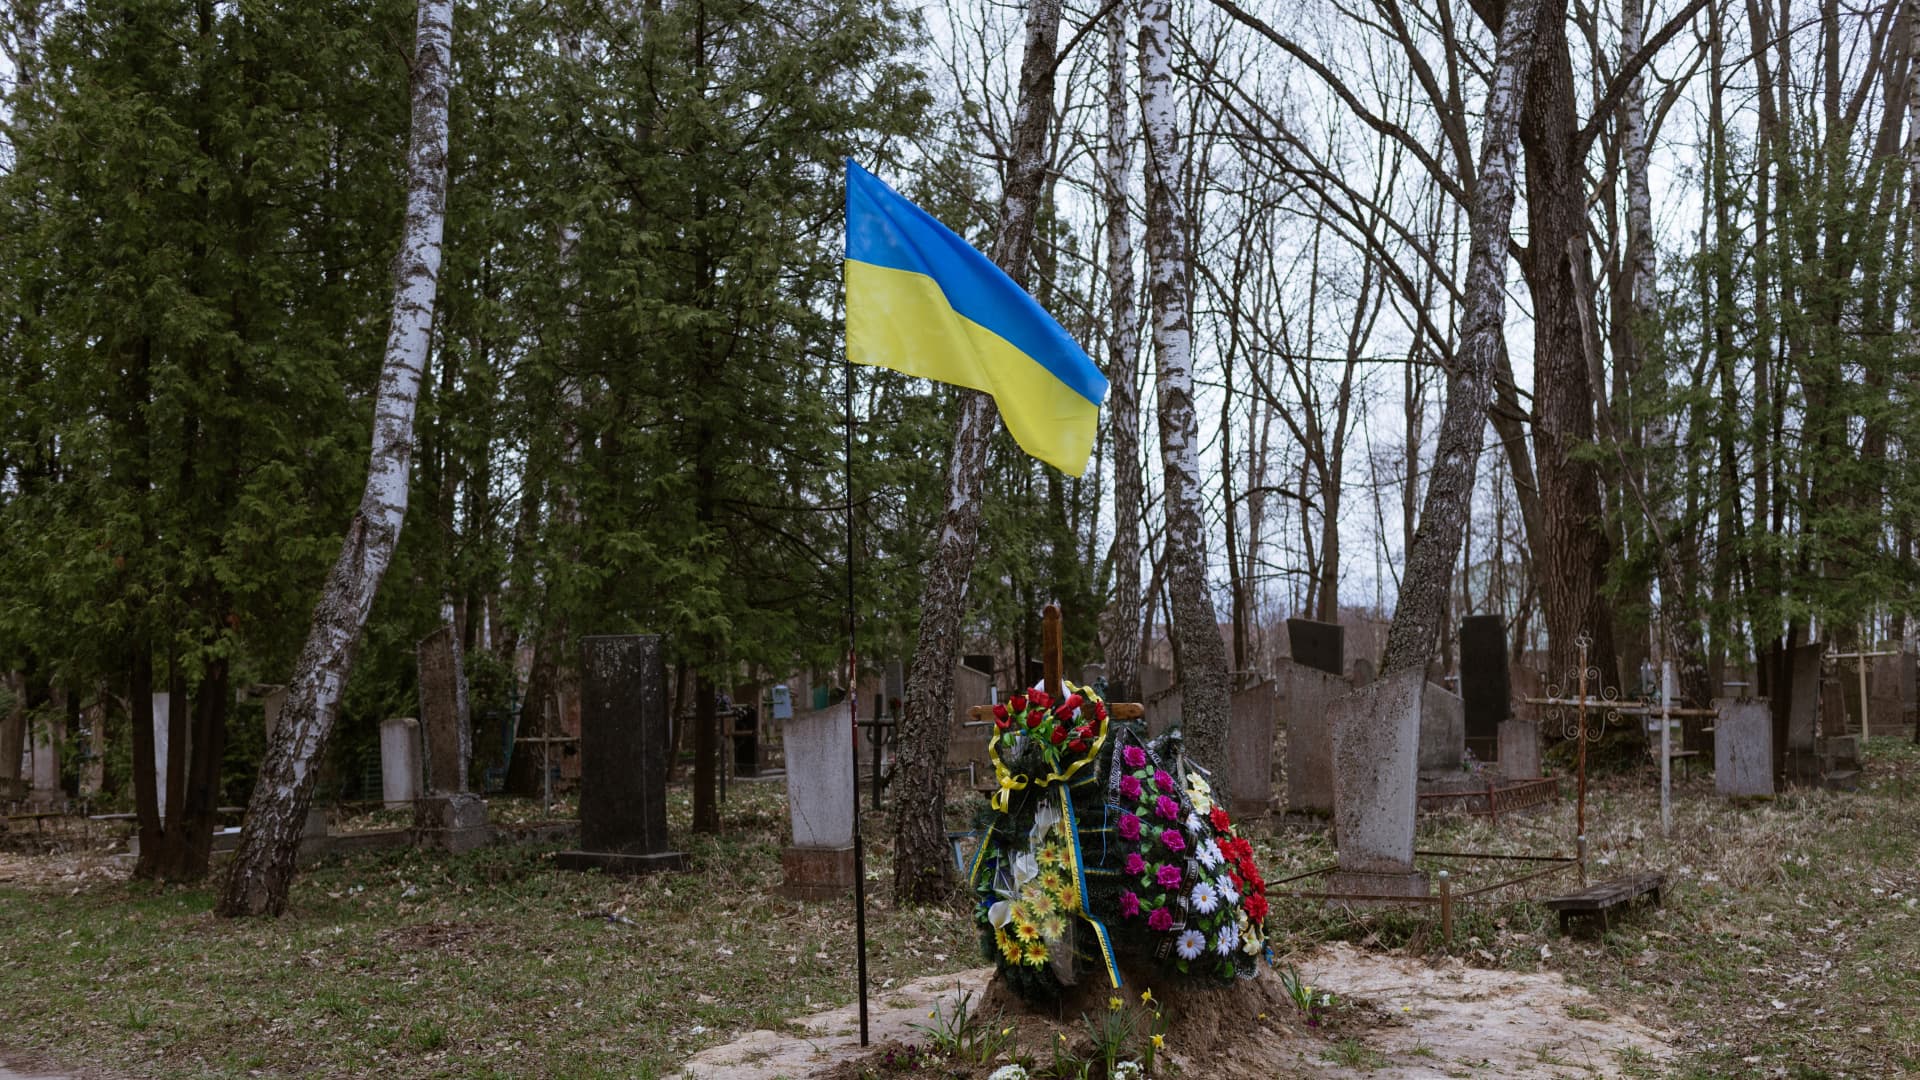 A grave with a wreath and a Ukrainian flag in Chernihiv, Ukraine on April 16, 2022. As many as 9,000 people may be buried in a mass grave in a village outside the city of Mariupol, Ukrainian officials said, NBC News reported.